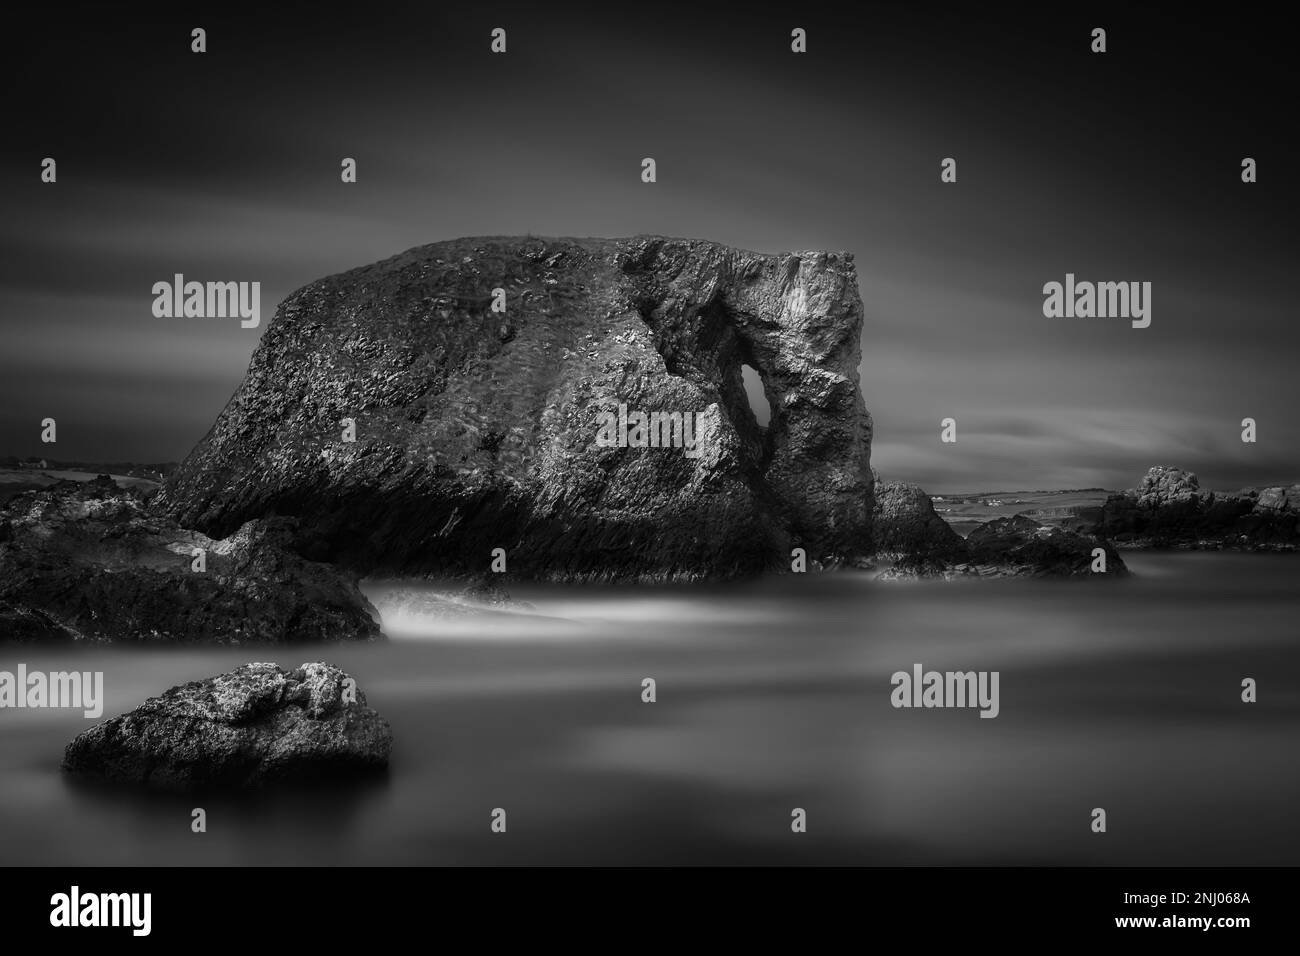 Costal rock formation, Elephant Rock on long exposure with blurred water and sky, black and white, Wild Atlantic Way, Antrim, Northern Ireland Stock Photo